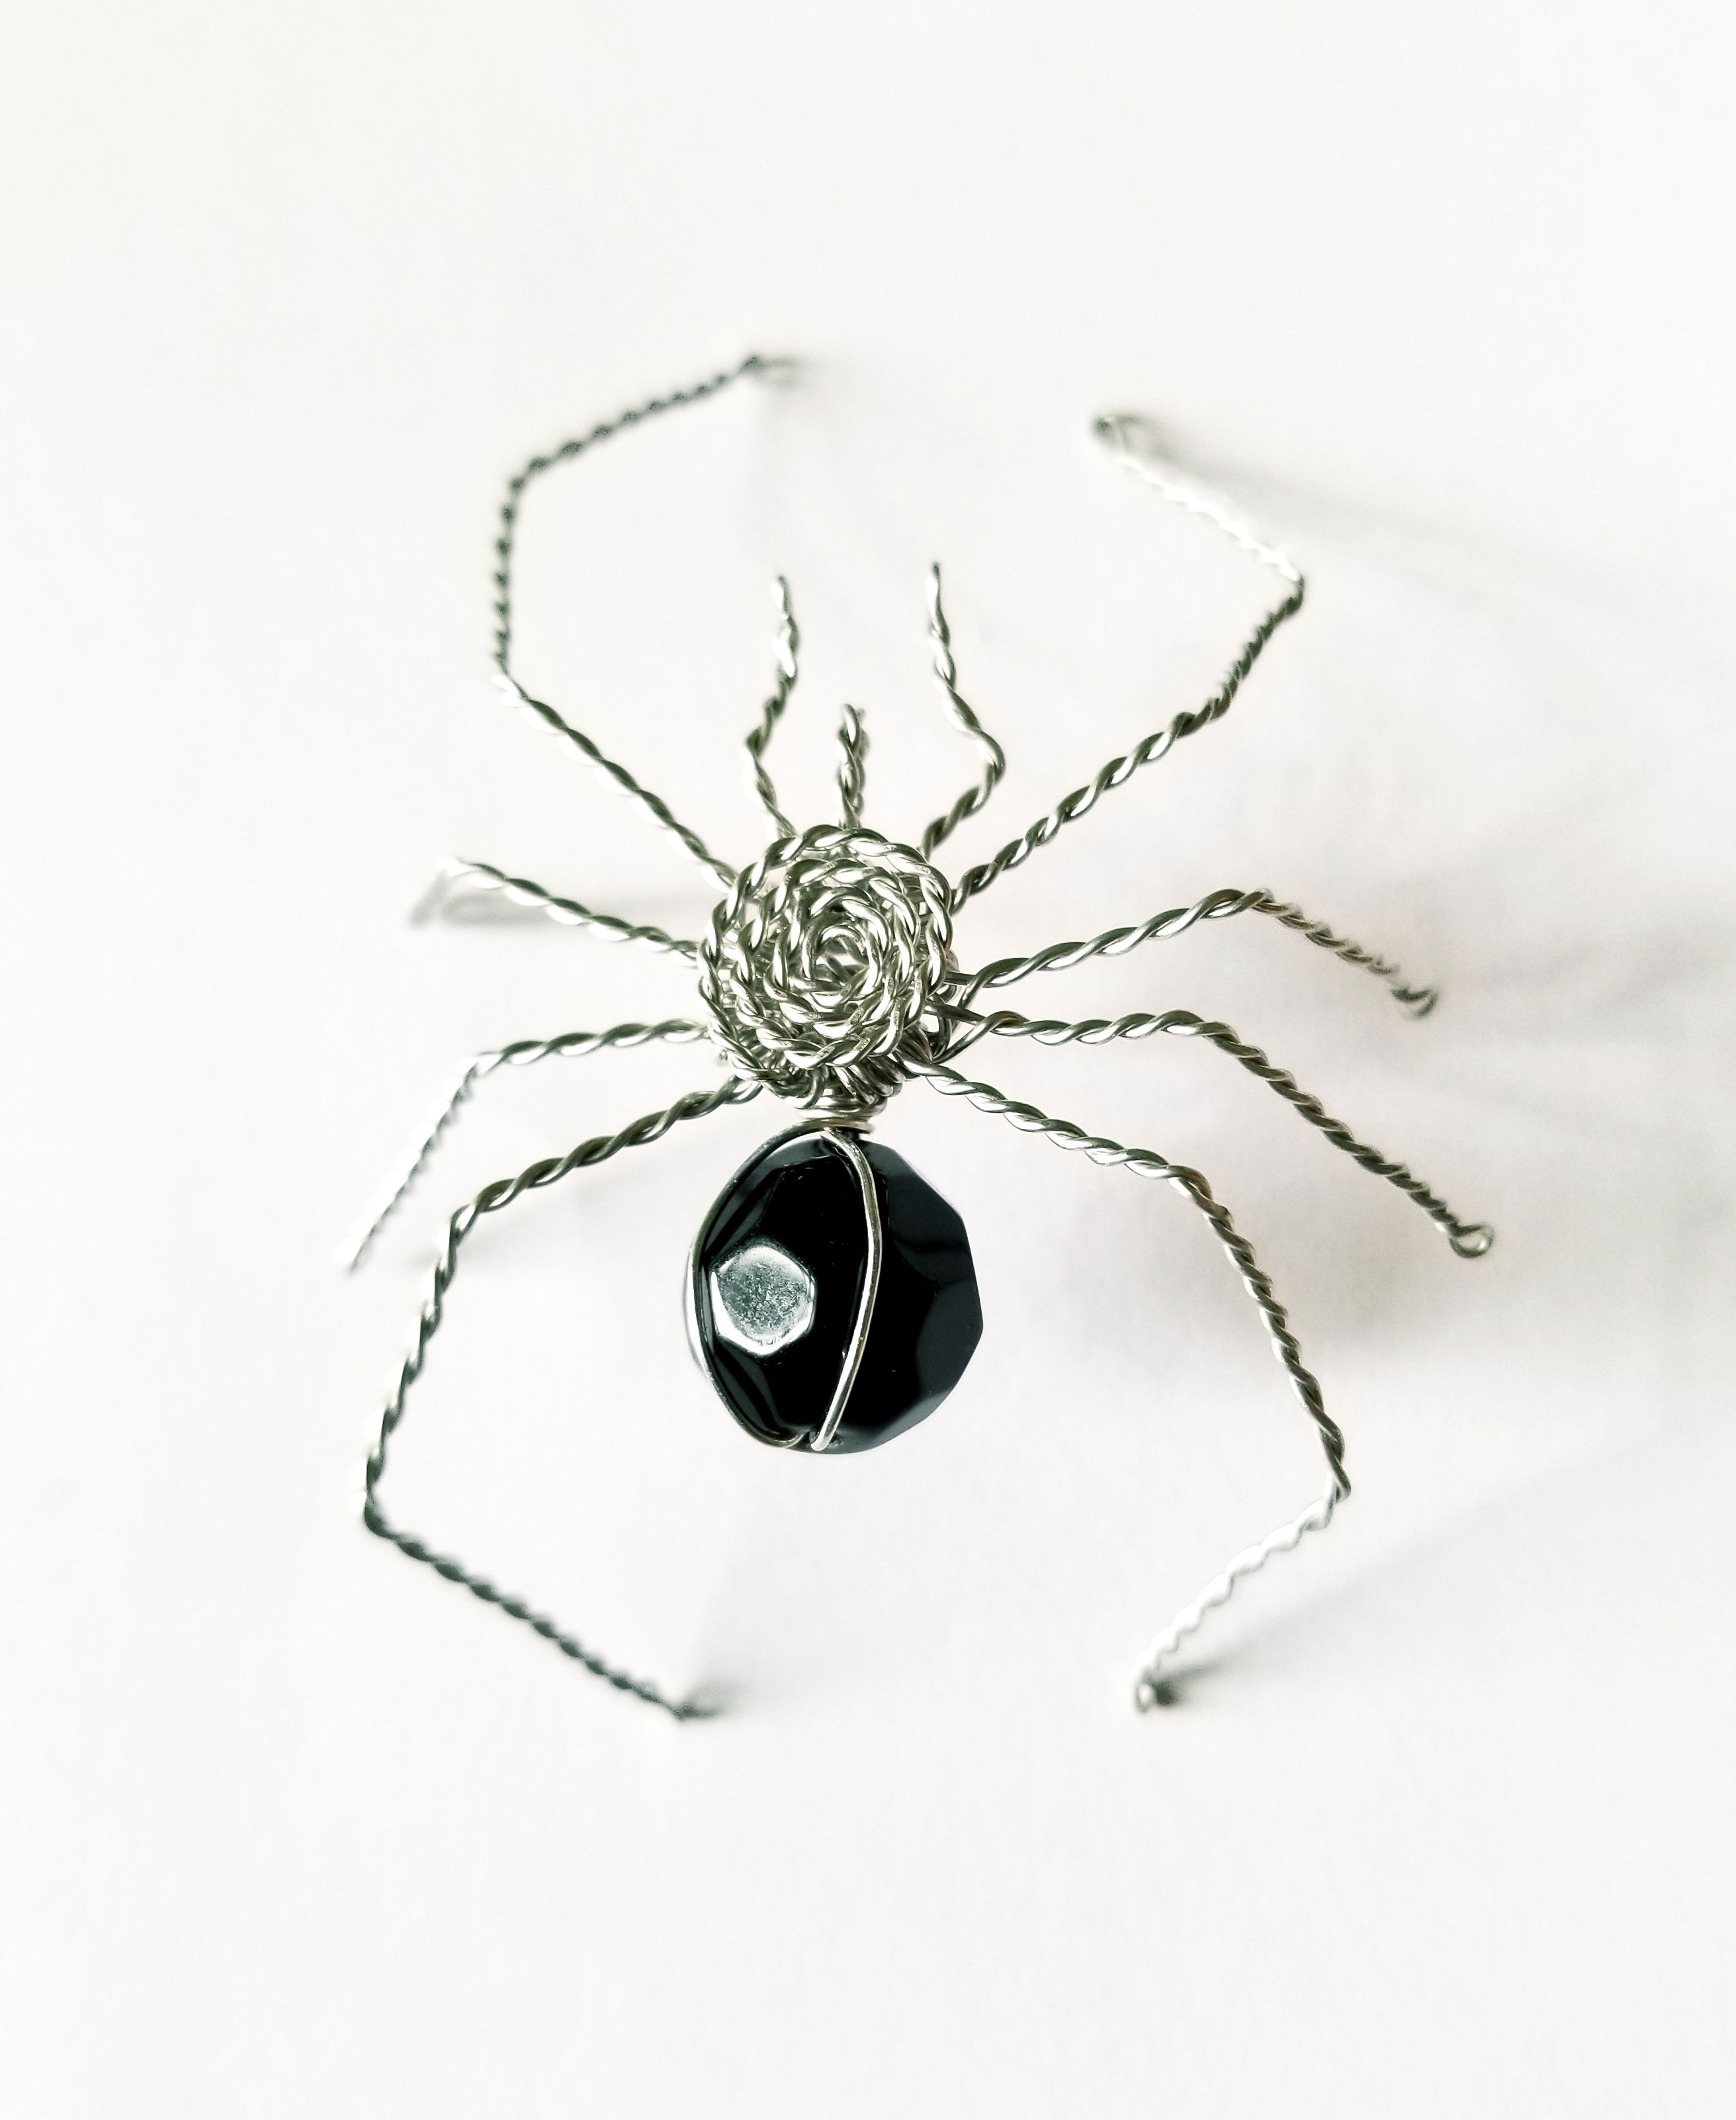 How to make a Wire Spider - How To: Weekly contest by @starjewel